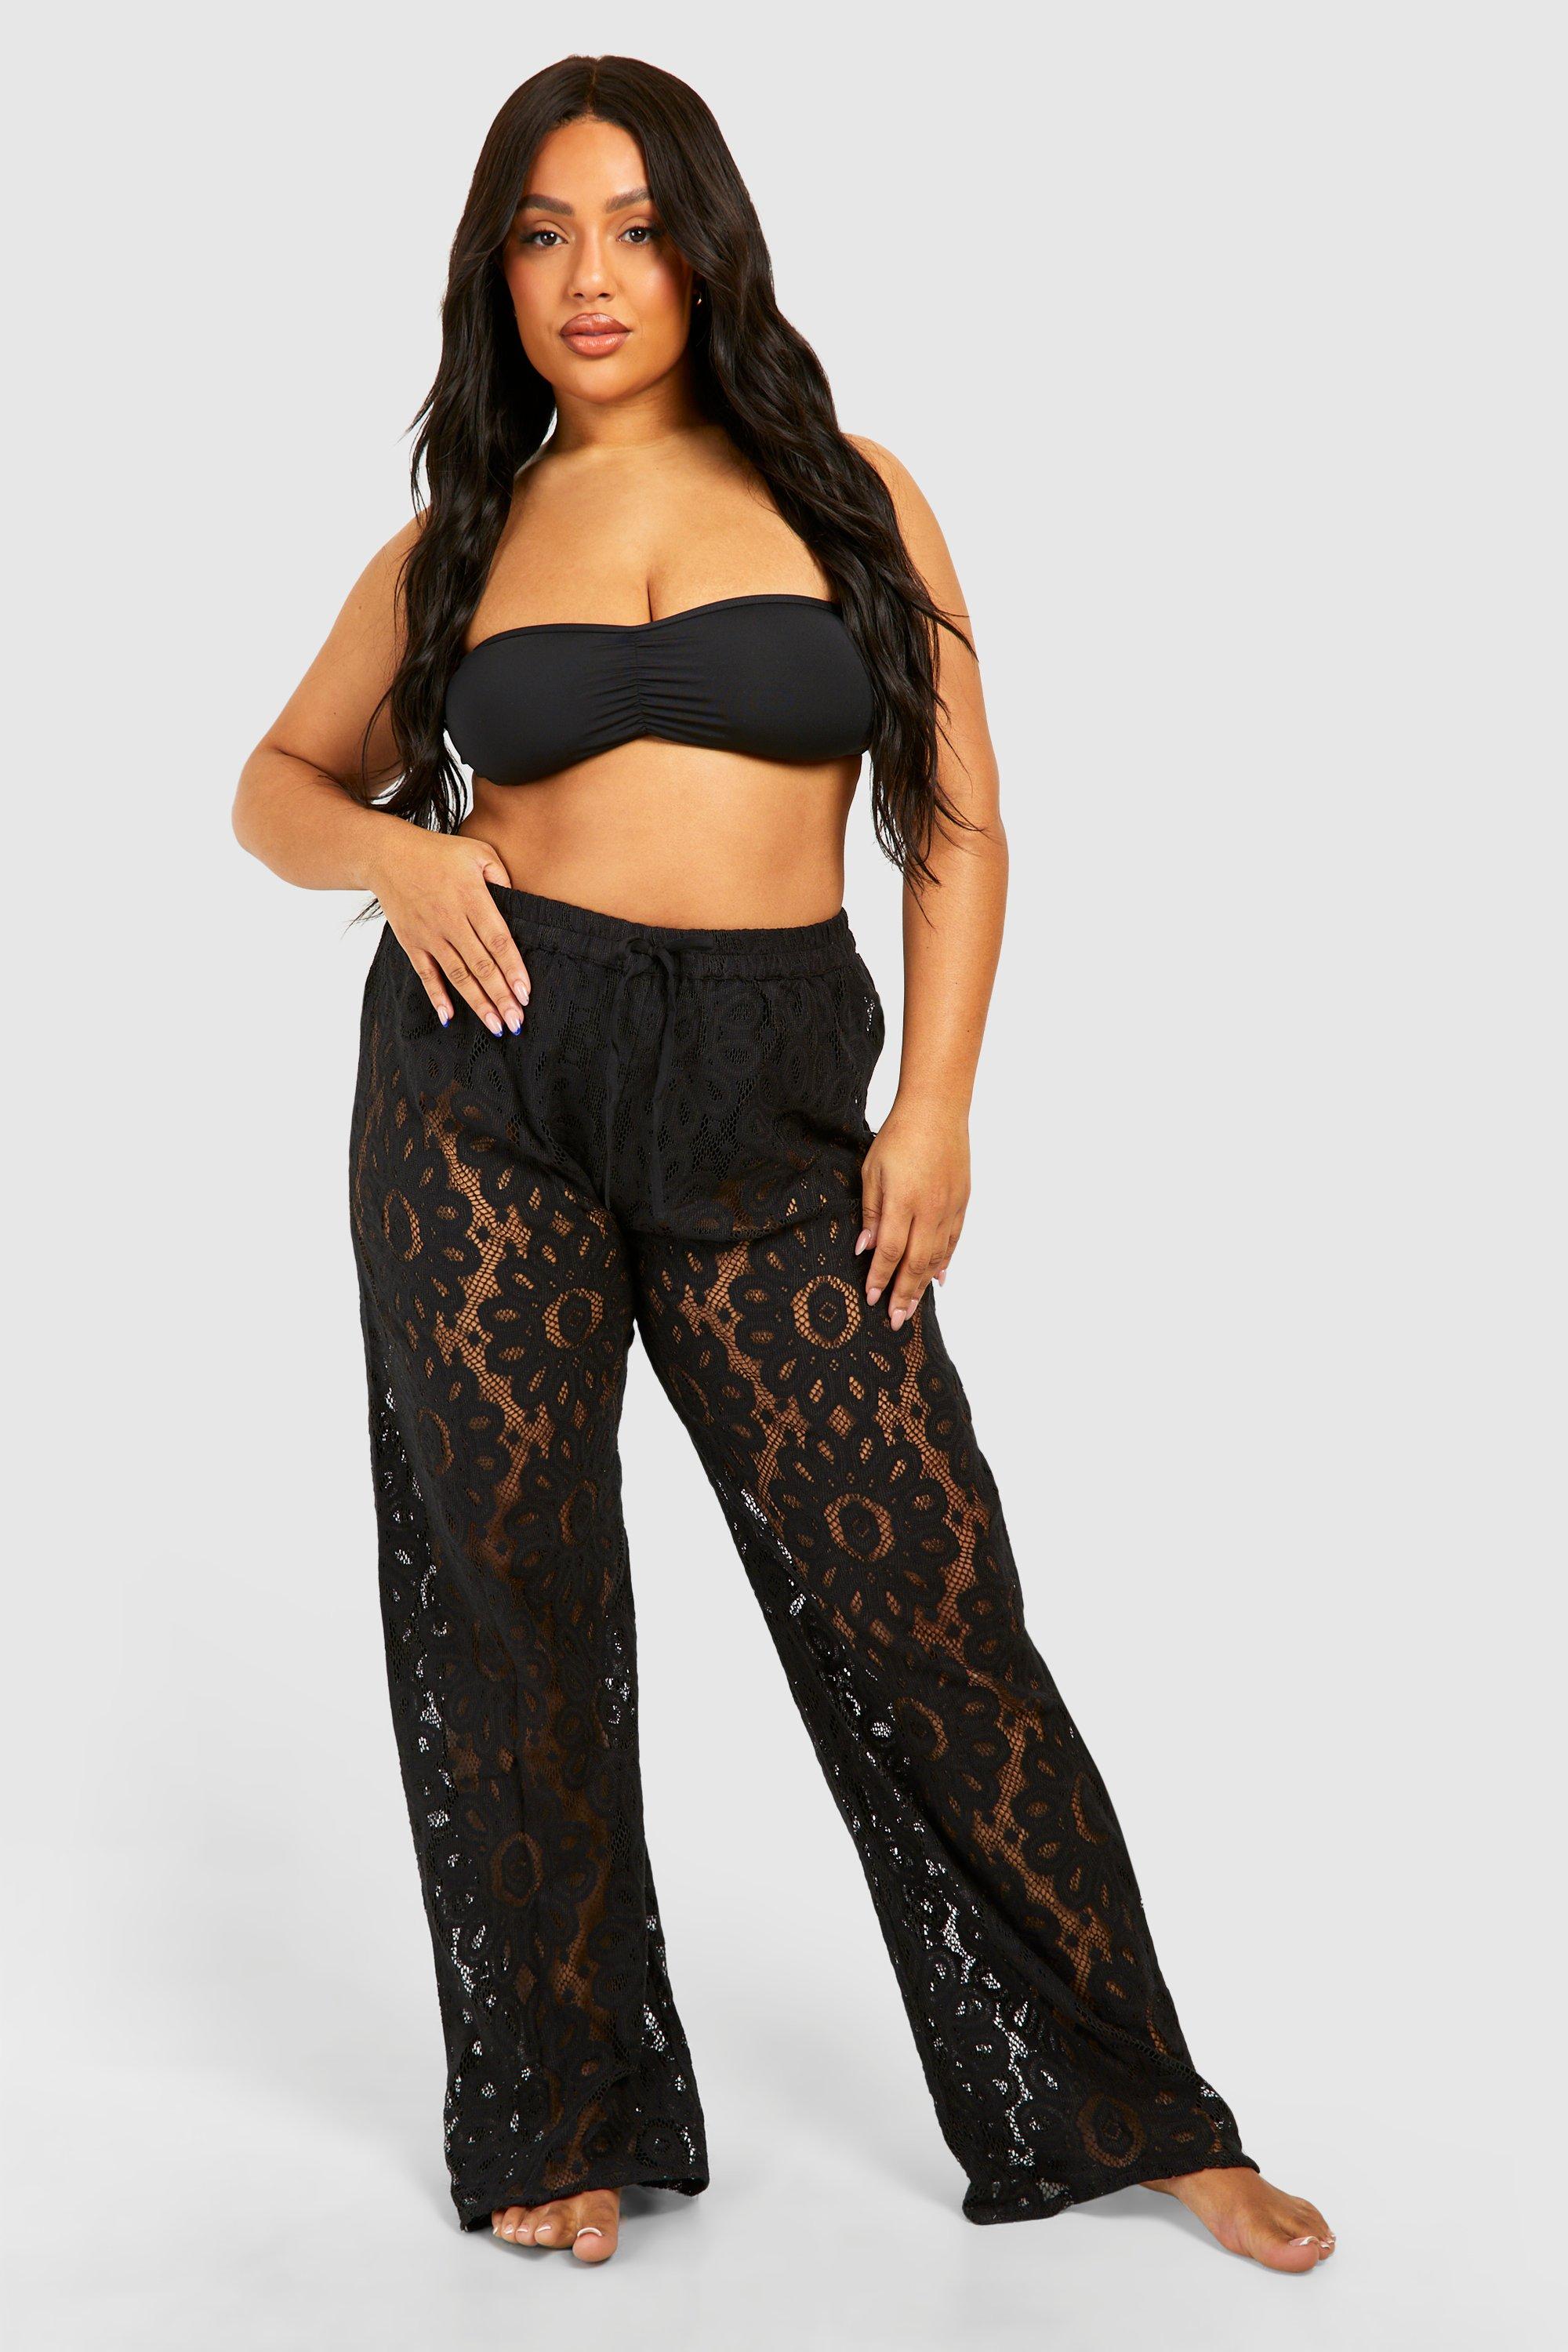 Angie Floral Wide Leg Beach Pant - Women's Pants in Black White | Buckle